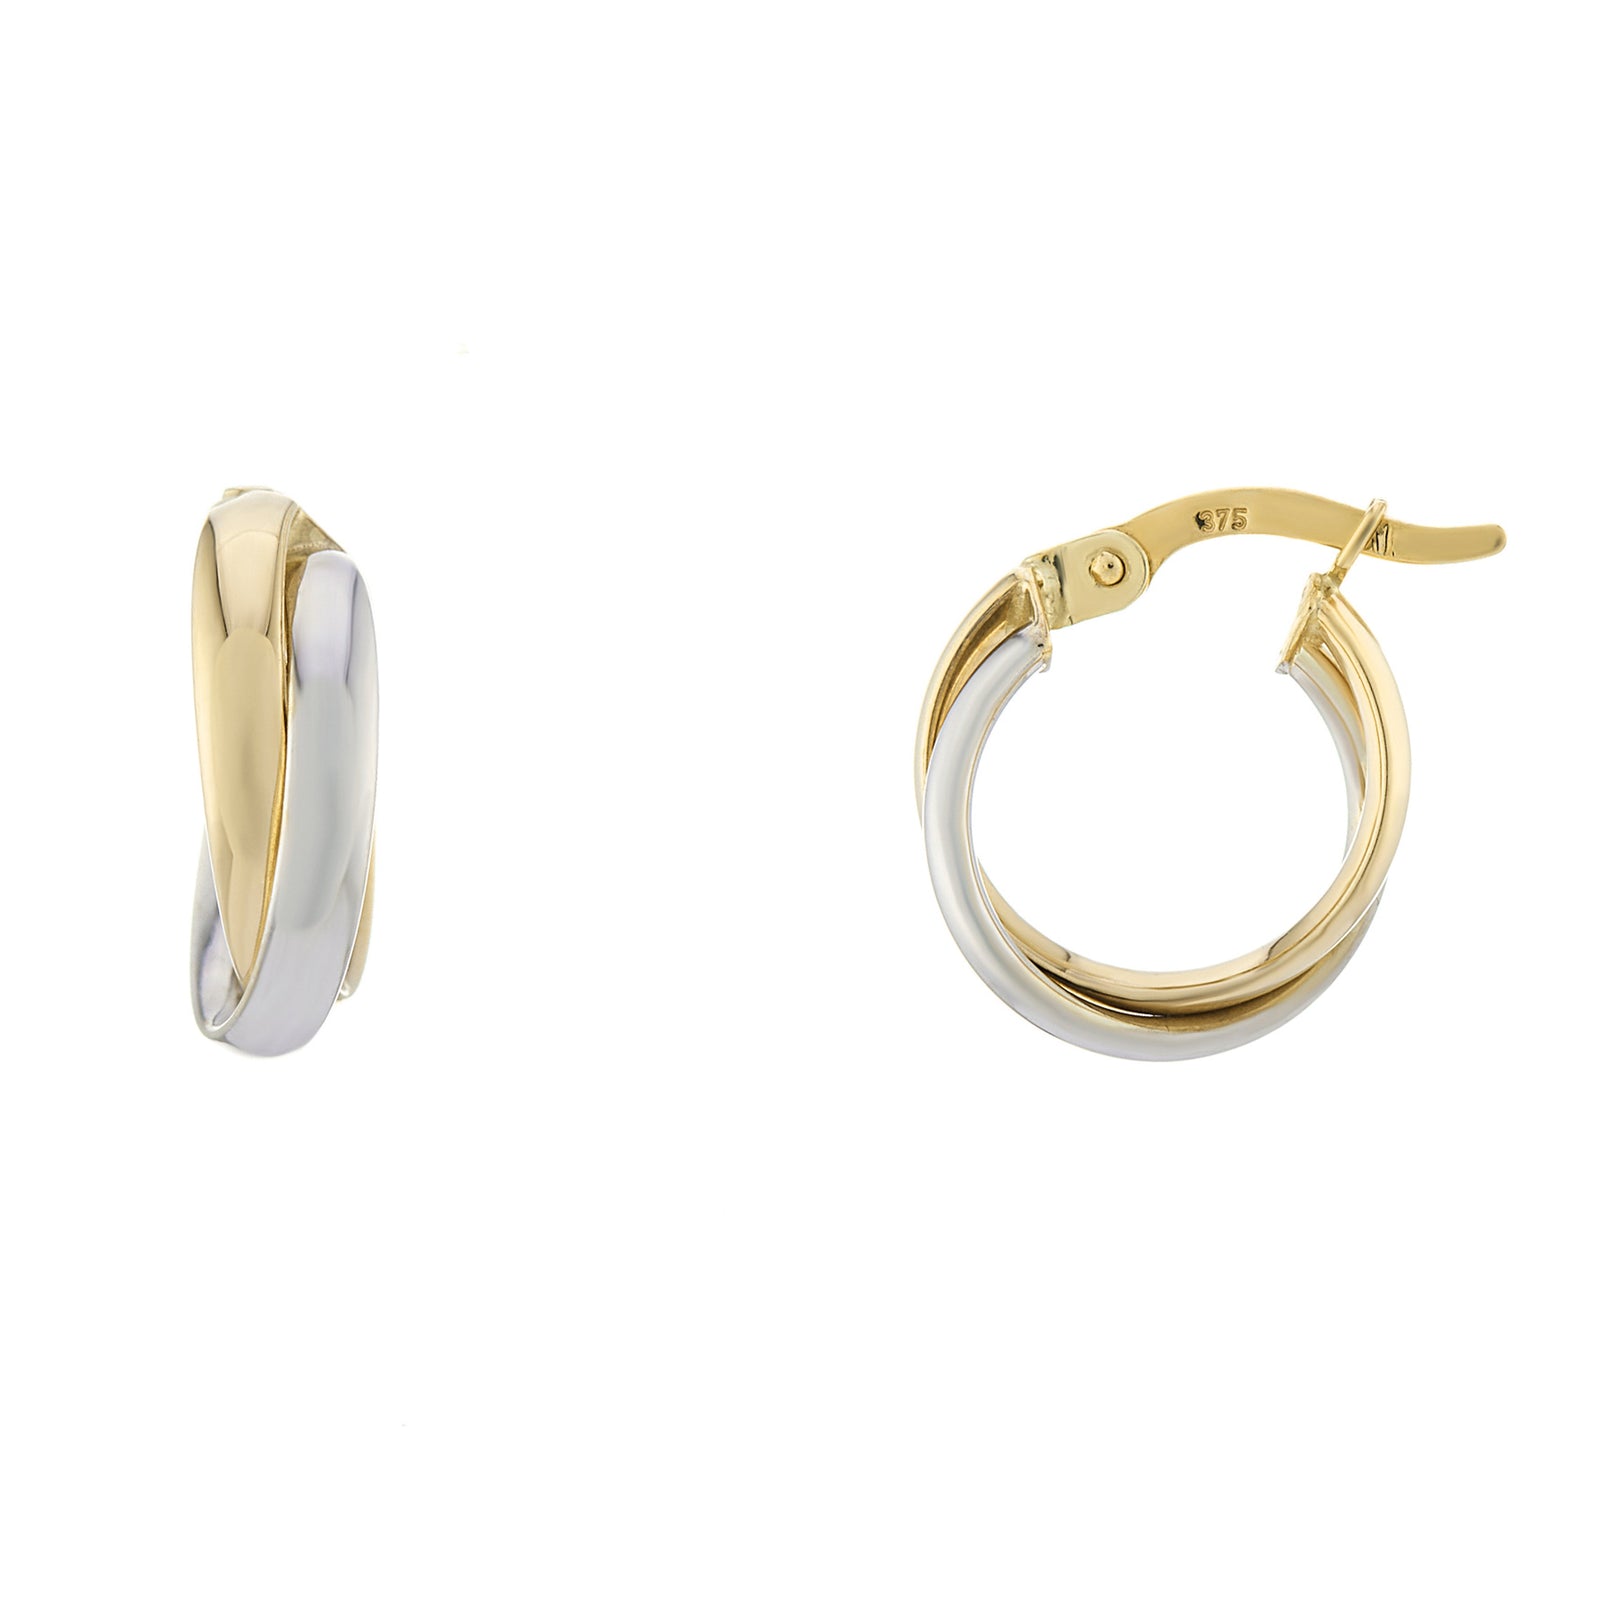 9ct two colour gold 10mm hoop earrings